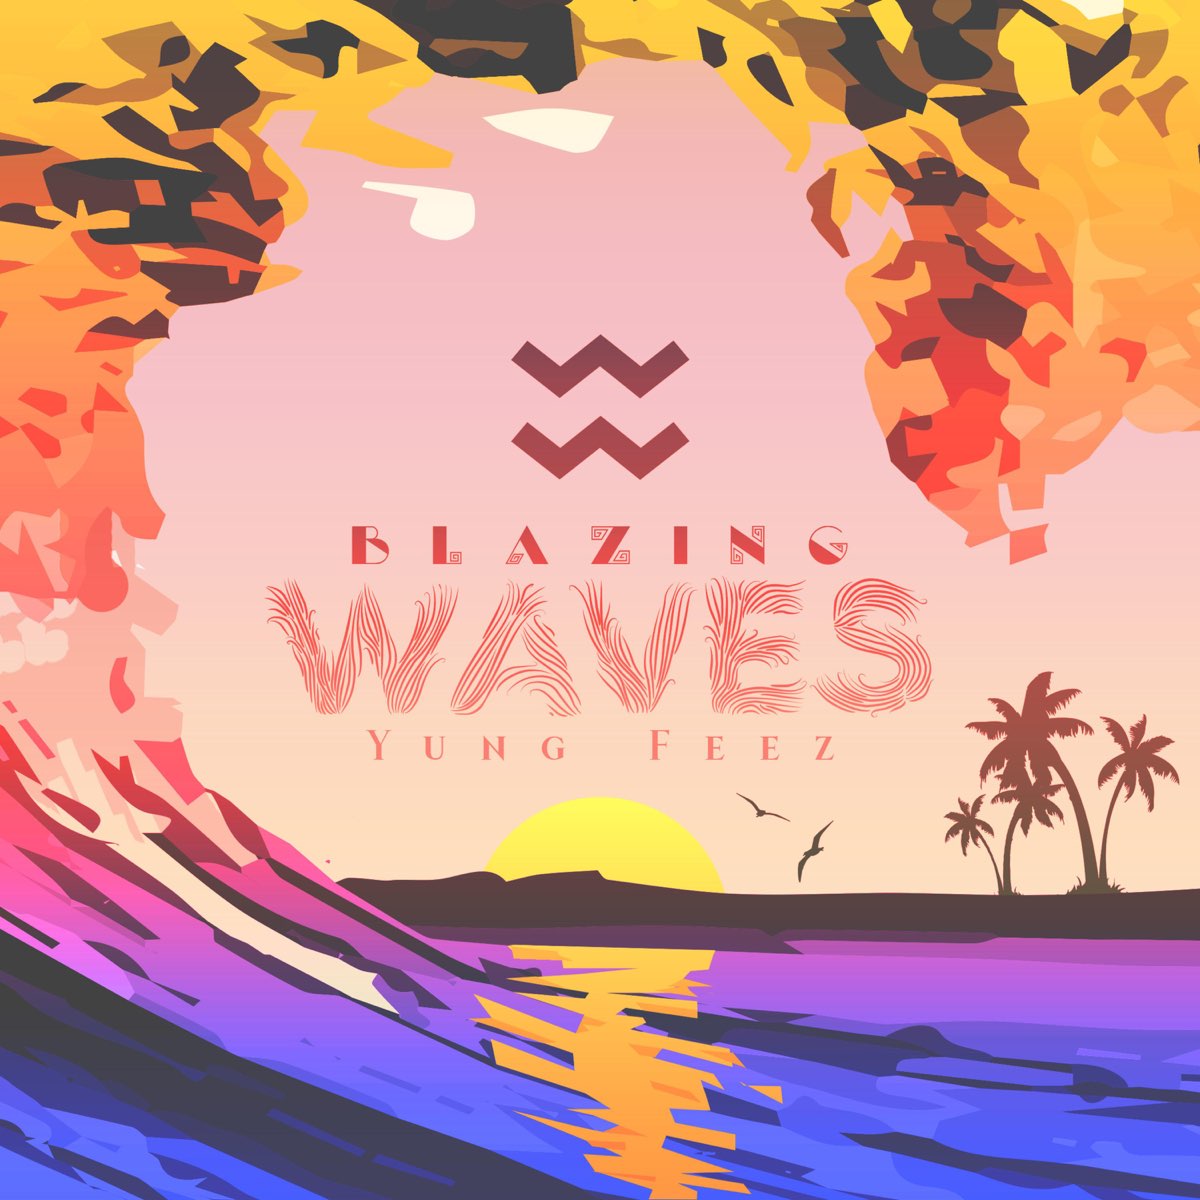 Waves feat. Yung Wave. Feez.